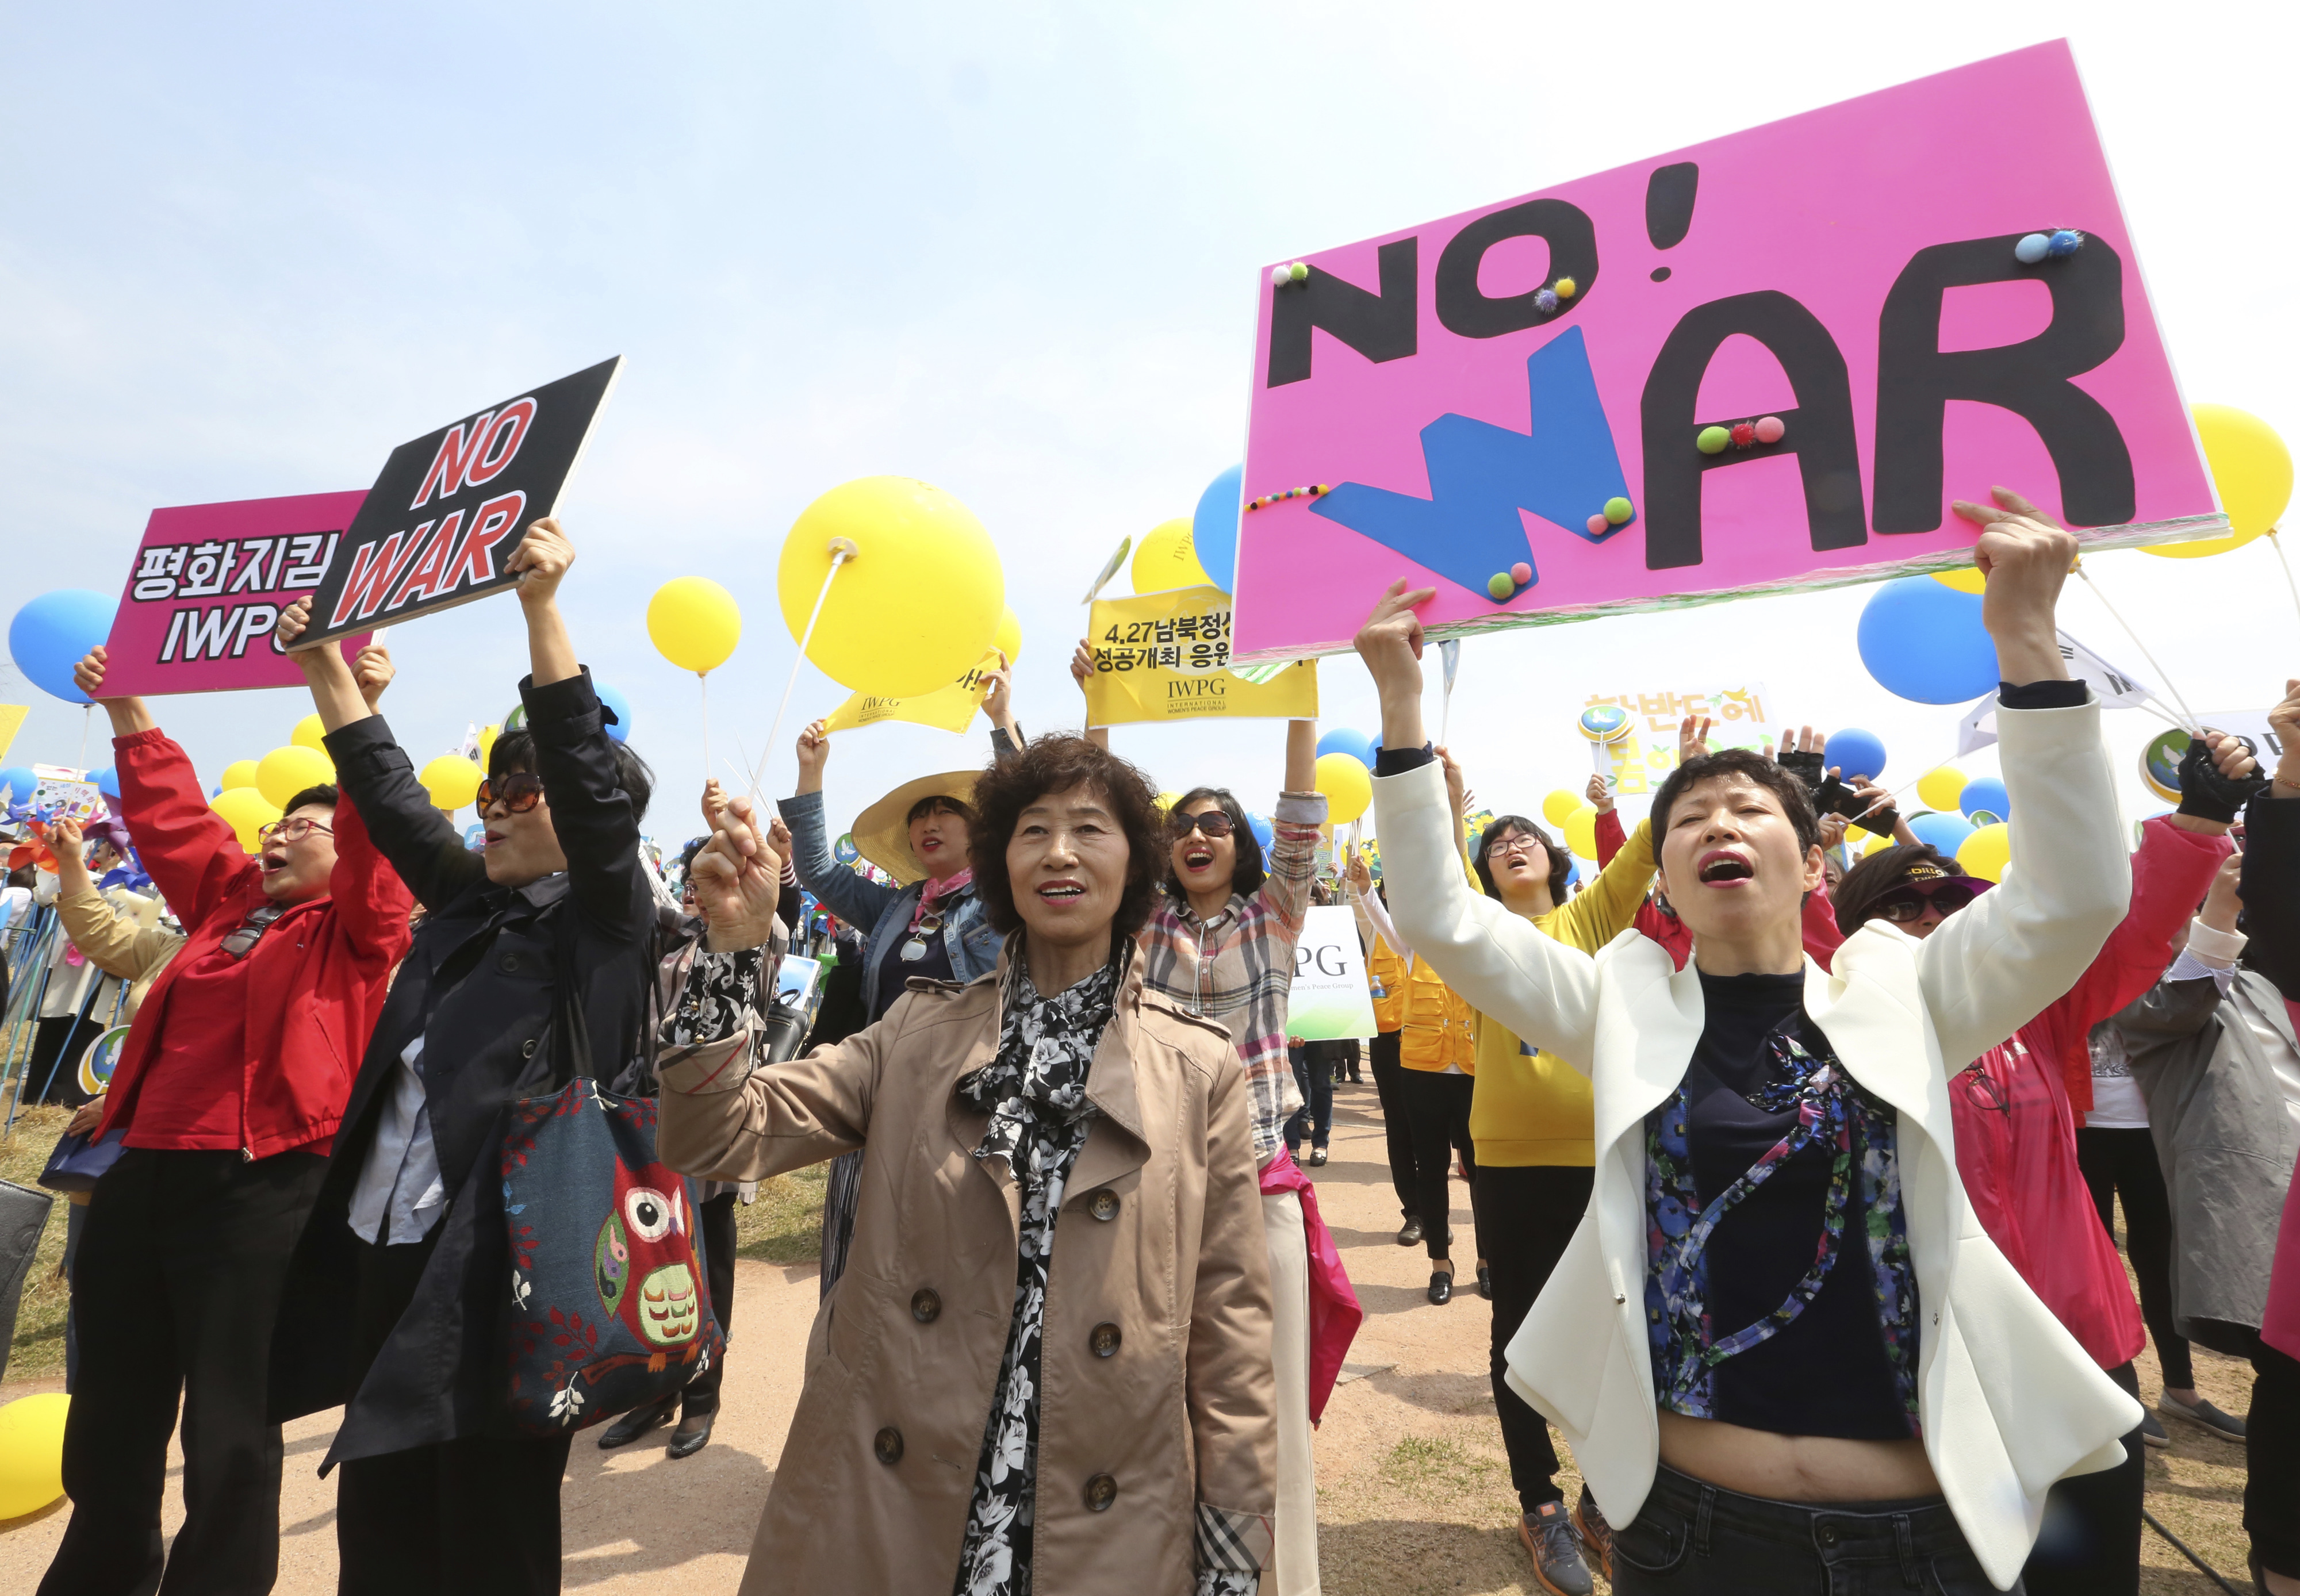 Members of the South Korean women's peace group stage a rally to support the upcoming summit between South and North Korea at the Imjingak Pavilion in Paju, South Korea, near the border with North Korea, Thursday, April 26, 2018. North Korean leader Kim Jong Un and South Korean President Moon-Jae-in will plant a commemorative tree and inspect an honor guard together after Kim walks across the border Friday for their historic summit, Seoul officials said Thursday. (AP Photo/Ahn Young-joon)